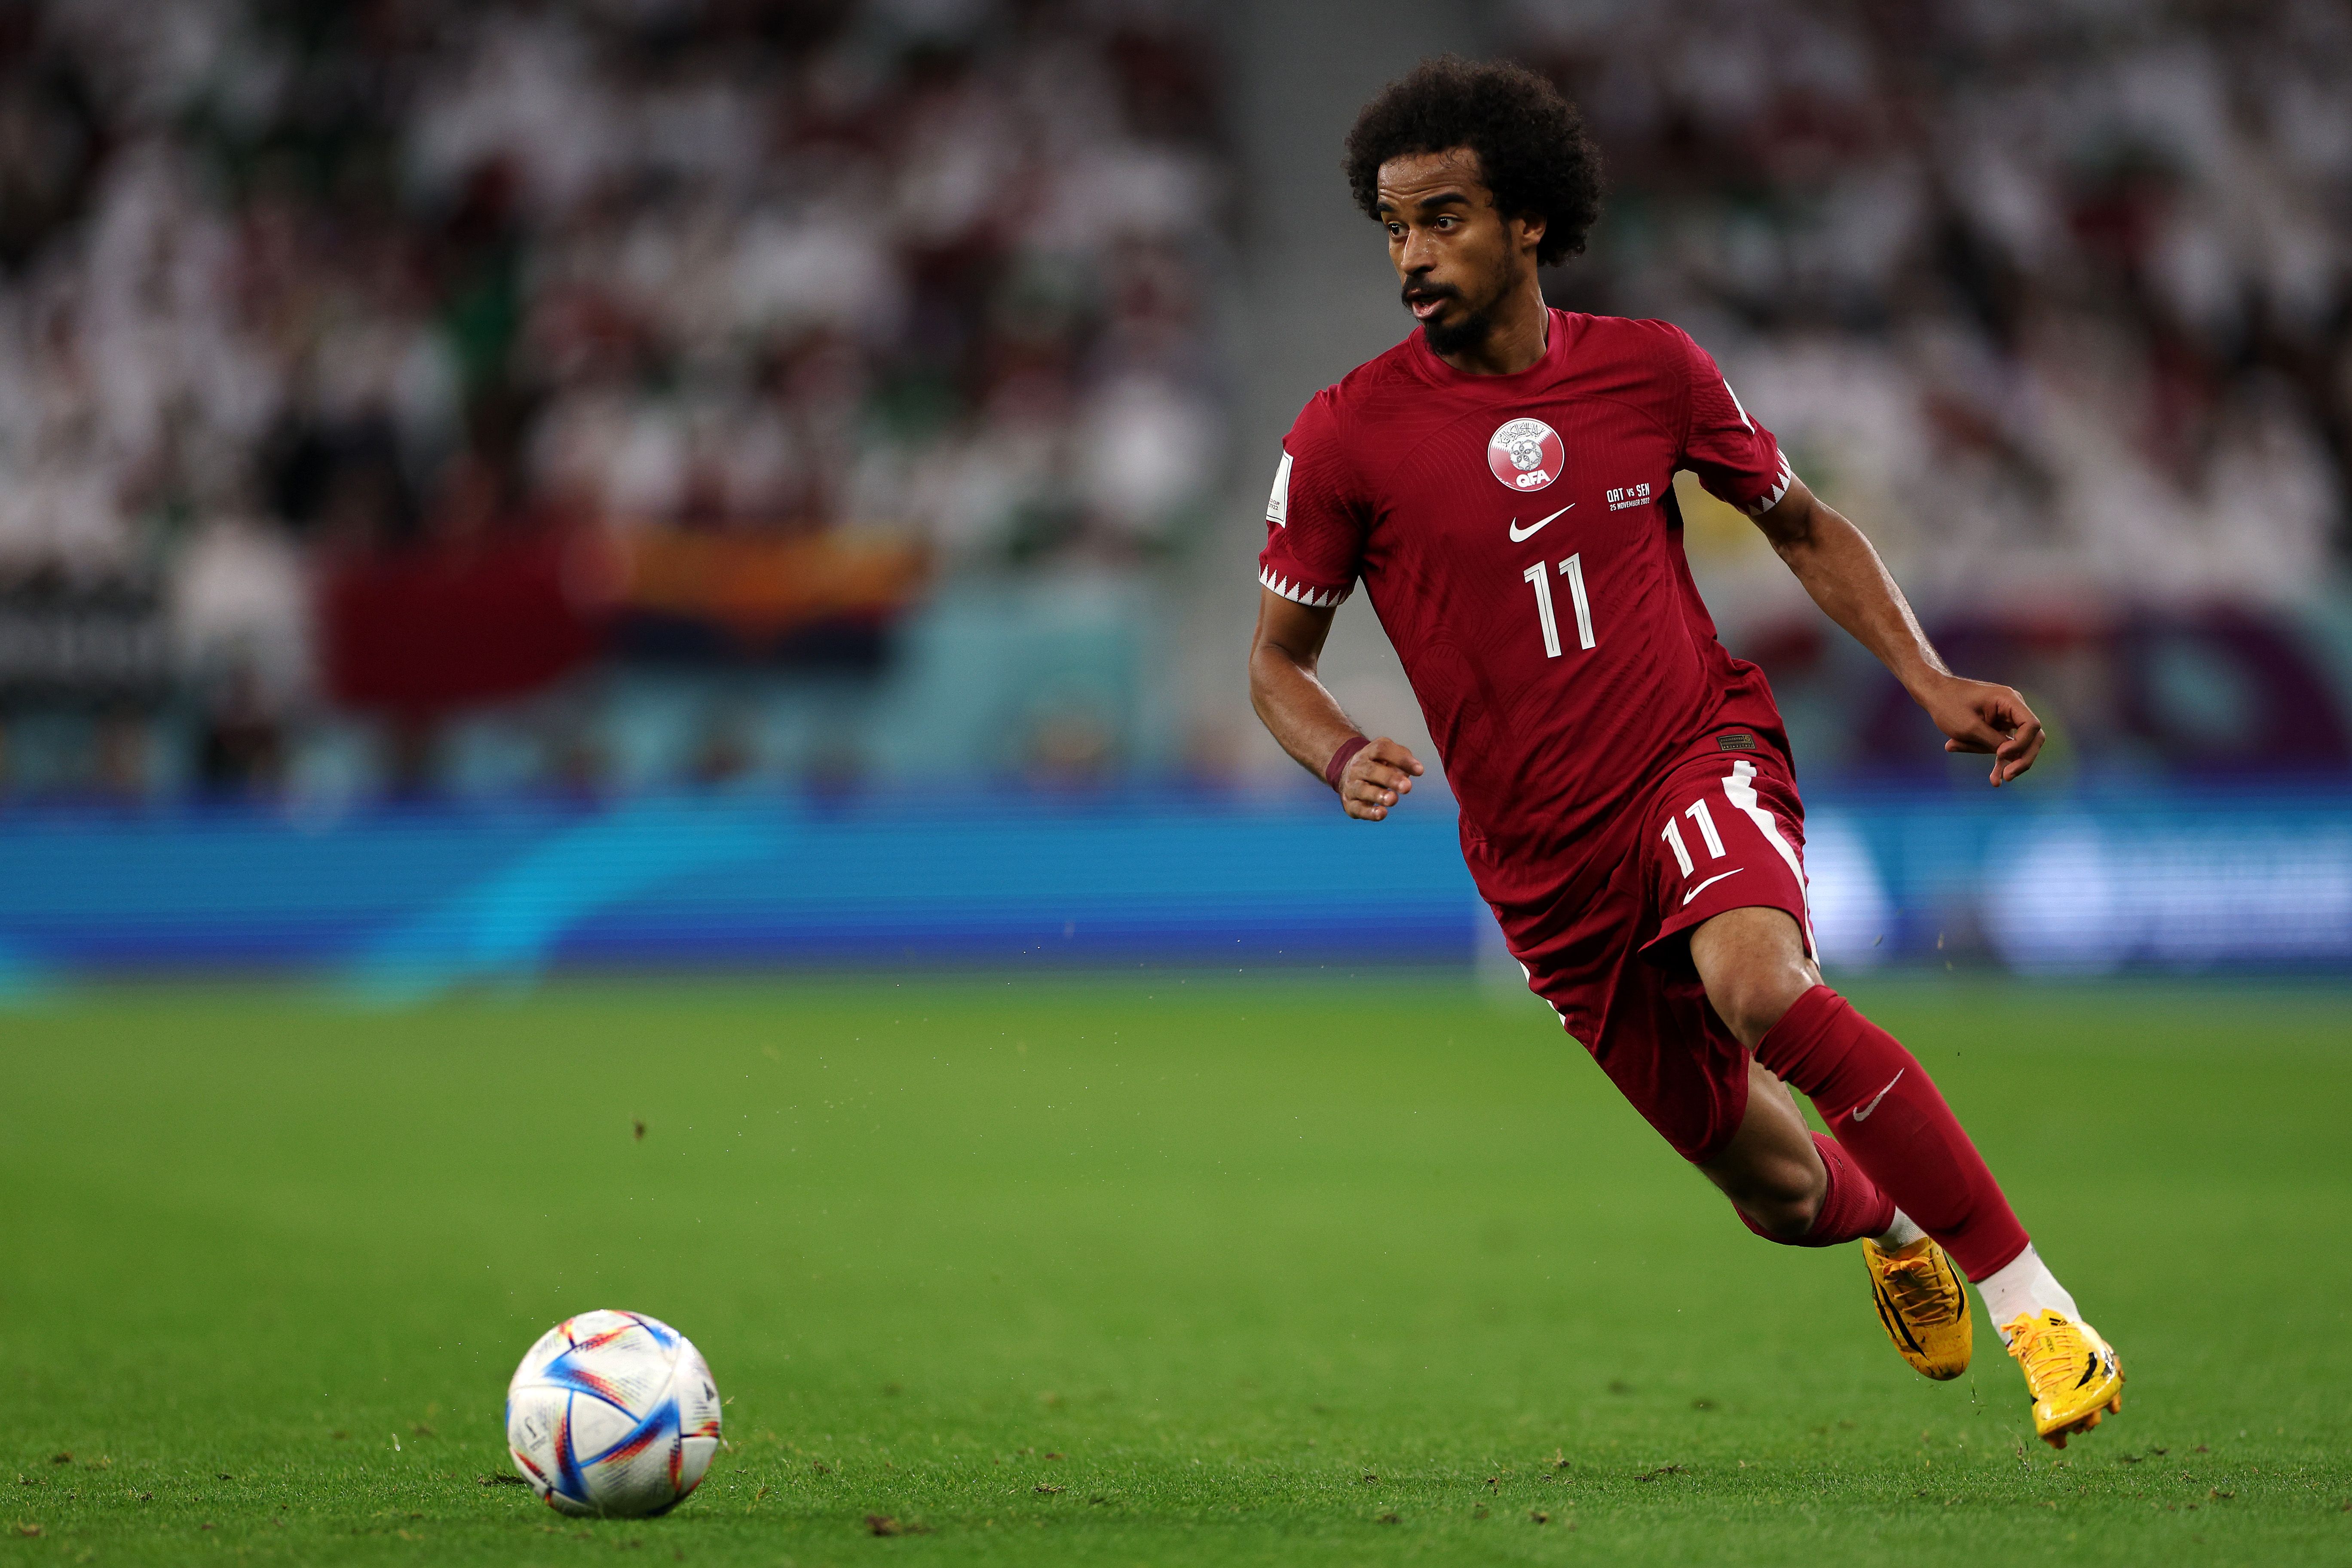 Akram Afif of Qatar in action during the FIFA World Cup Qatar 2022